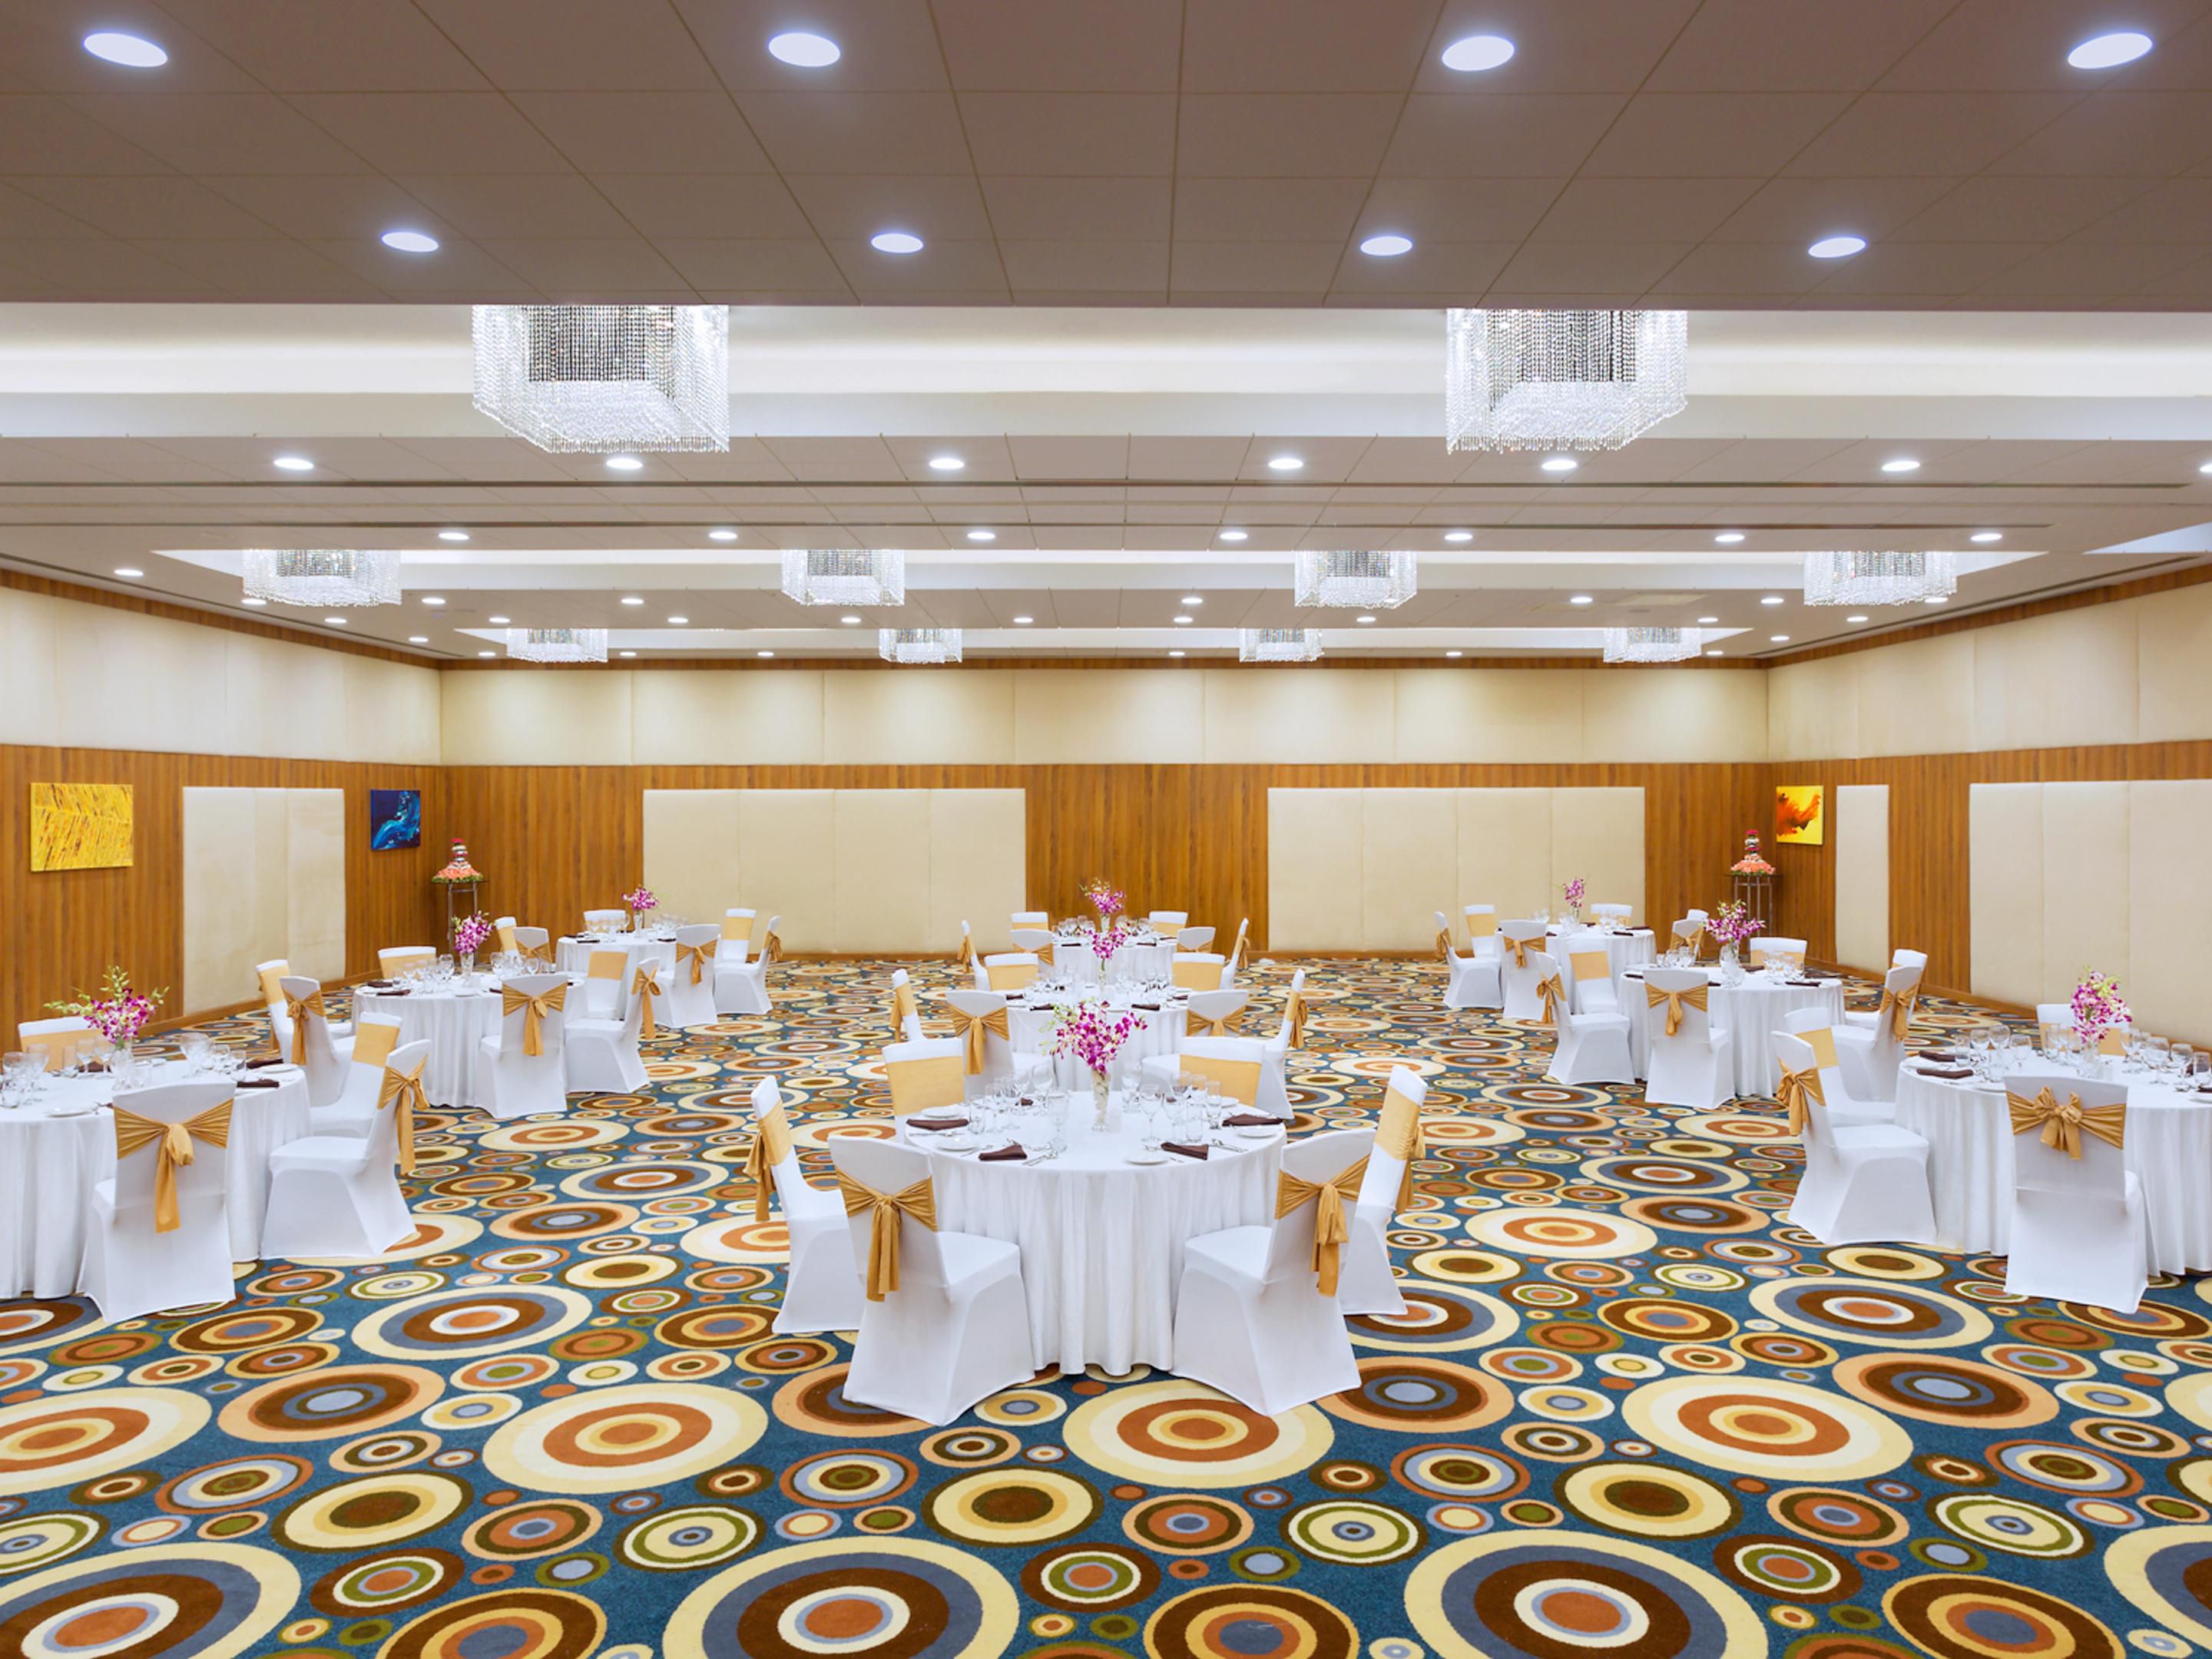 Let Our Grand ballroom at Holiday Inn Cochin be the preferred venue for business & social meetings. Plan your next big event with stunning backdrop in the heart of the city with comprehensive planning & experienced staff we can make it the most memorable and incredible event. 
Your special day may be a dream we make sure it's perfect.